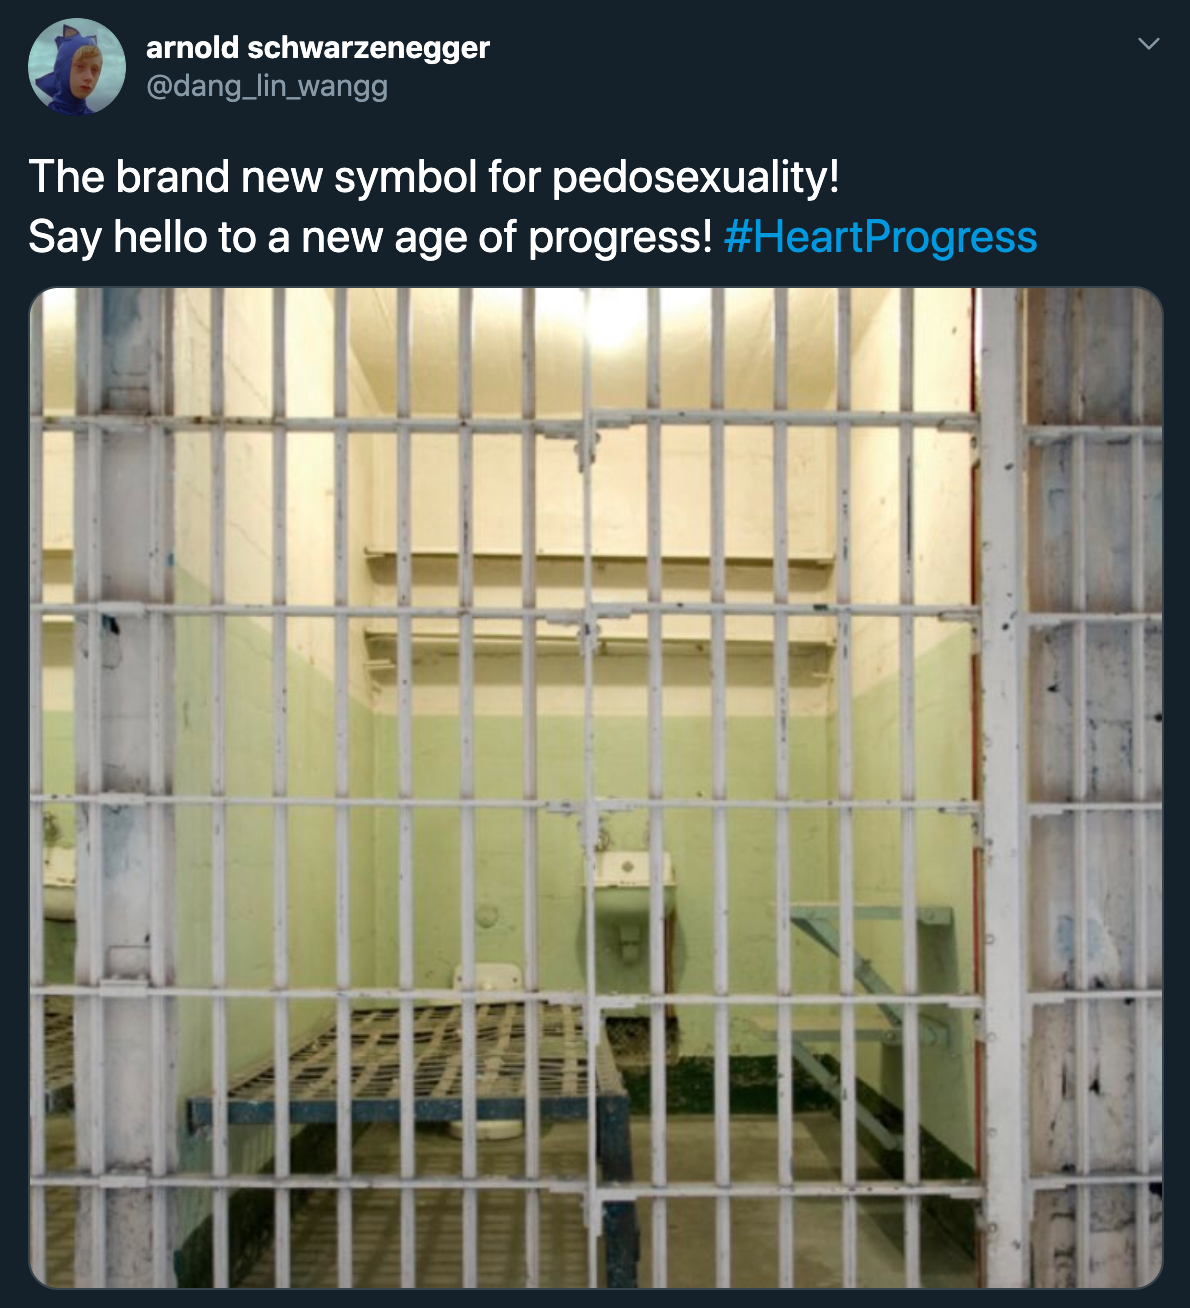 jail cell - arnold Schwarzenegger The brand new symbol for pedosexuality! Say hello to a new age of progress!